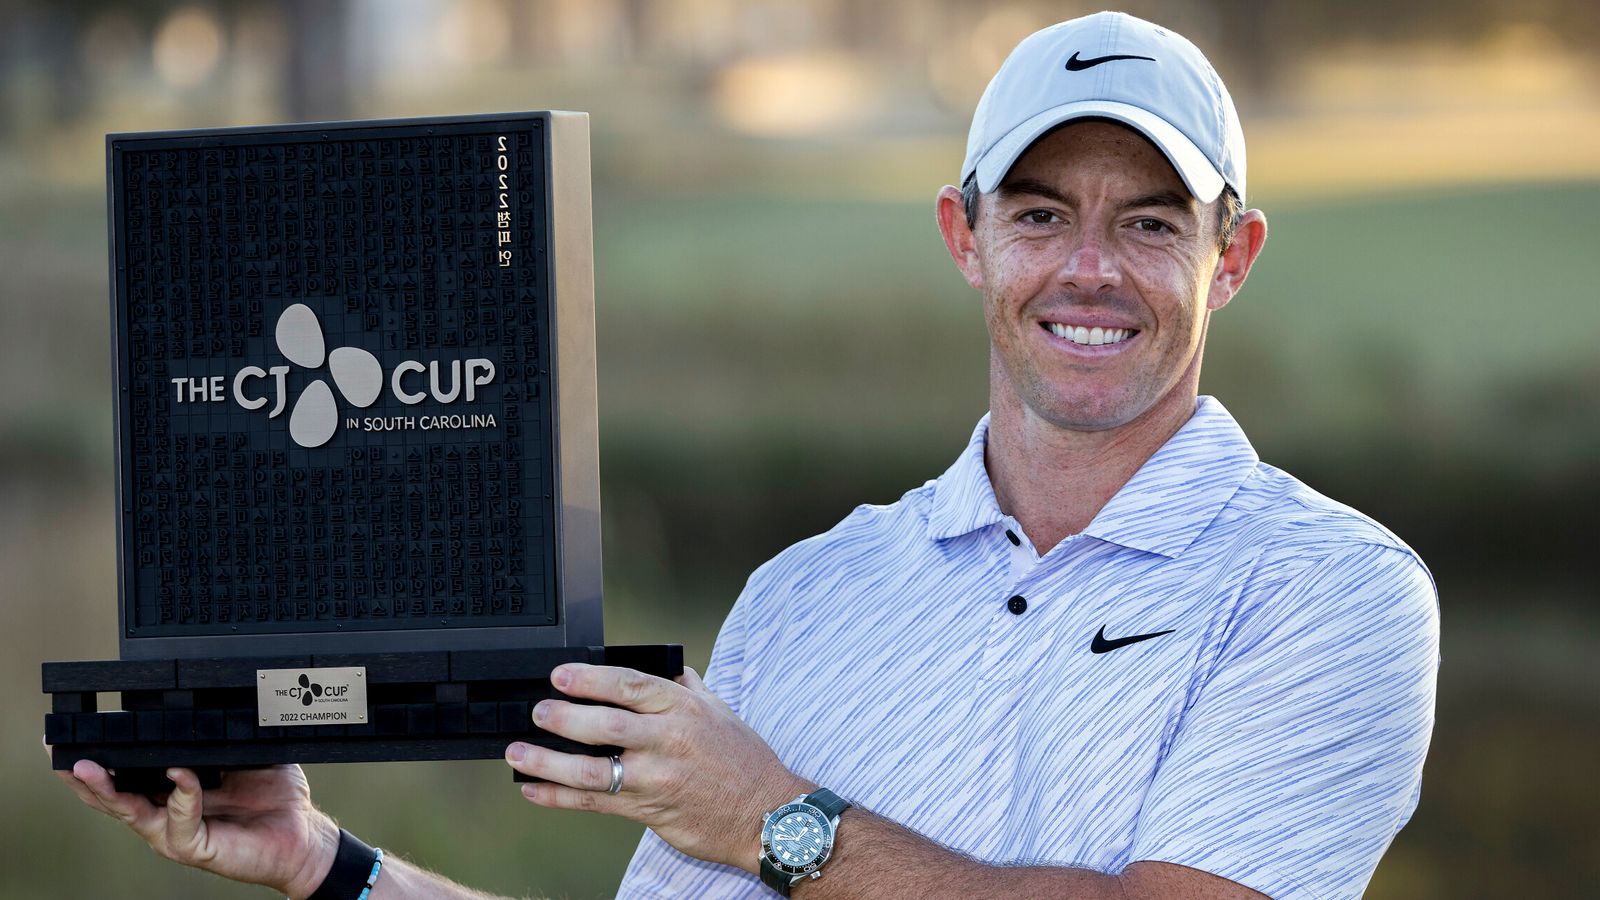 Rory McIlroy returns to world No 1 after starting PGA Tour season with impressive CJ Cup victory | Golf News | Sky Sports thumbnail